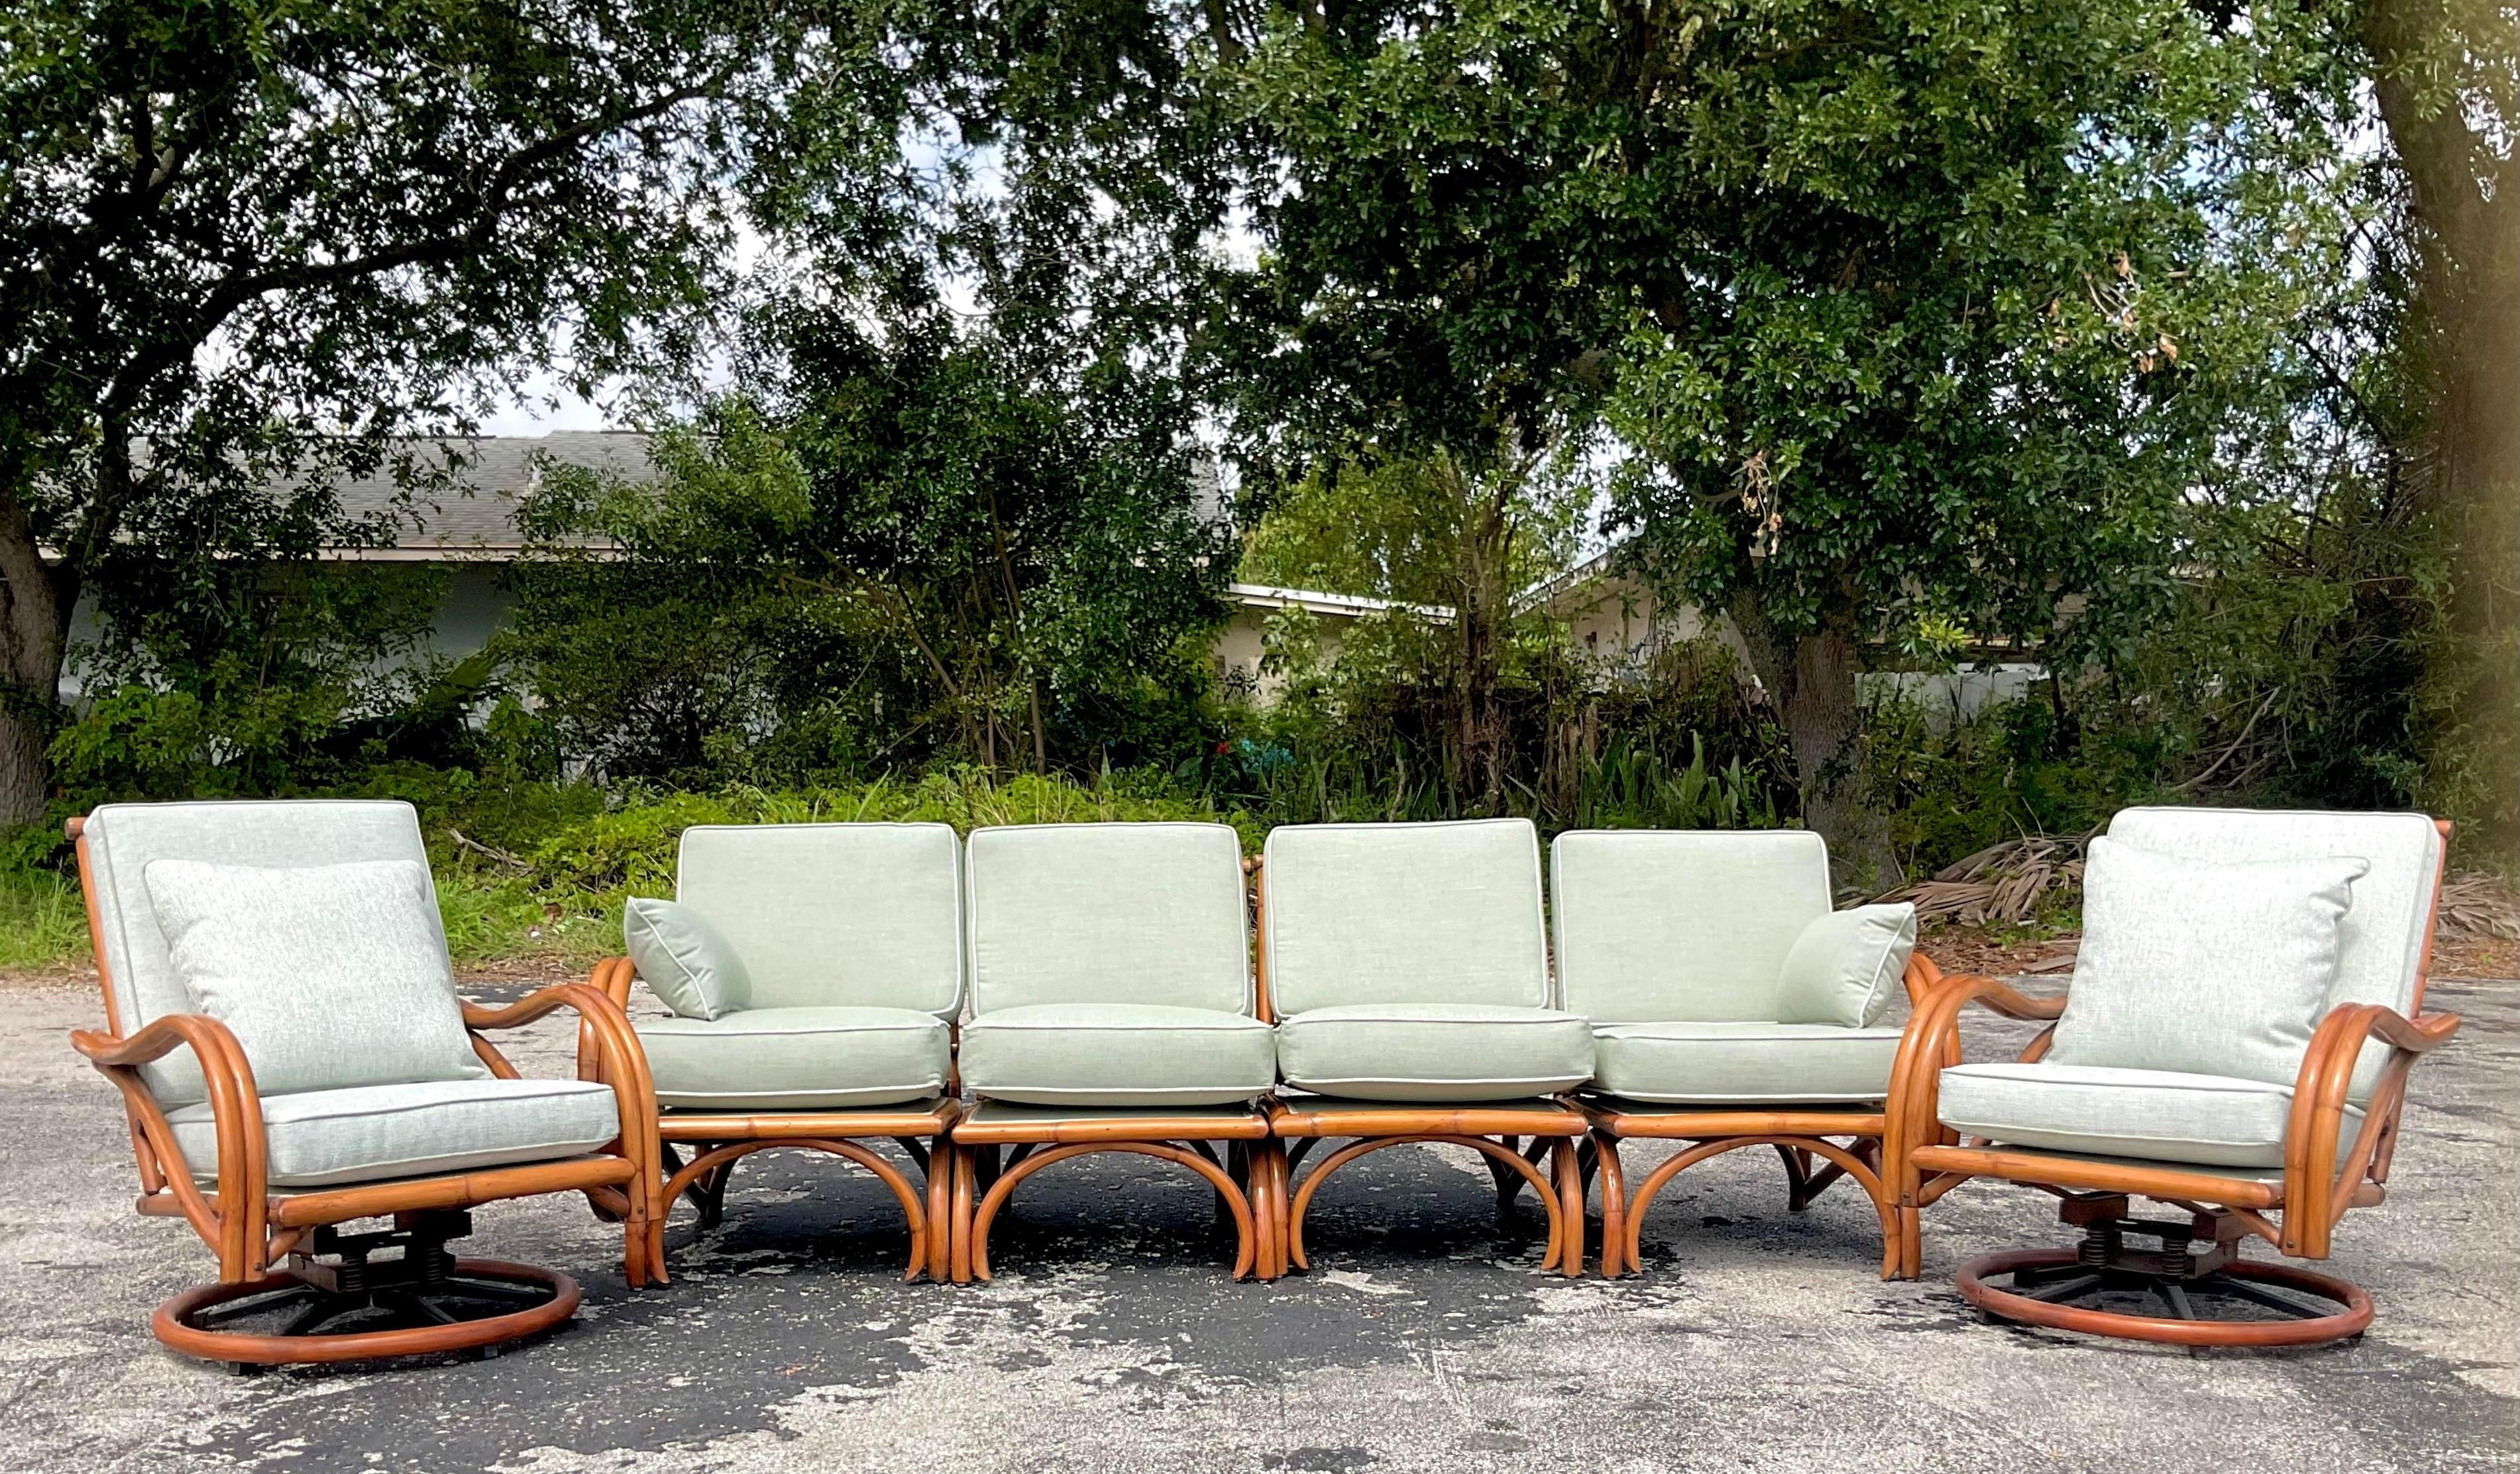 Philippine Mid-20th Century Vintage Coastal Bent Rattan Swivel Chairs - a Pair For Sale